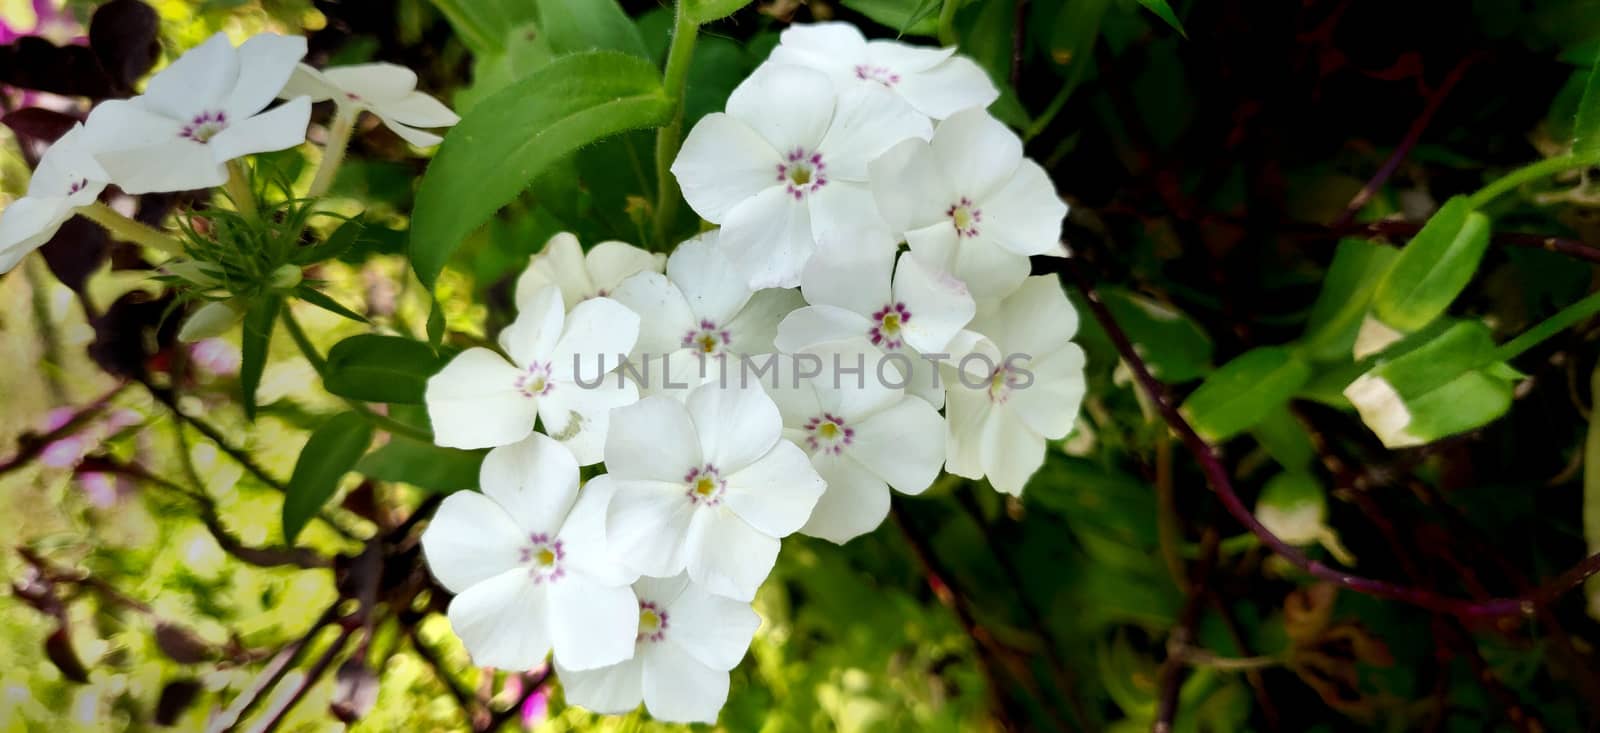 Garden phlox white flower bunch with pink in the center by mshivangi92